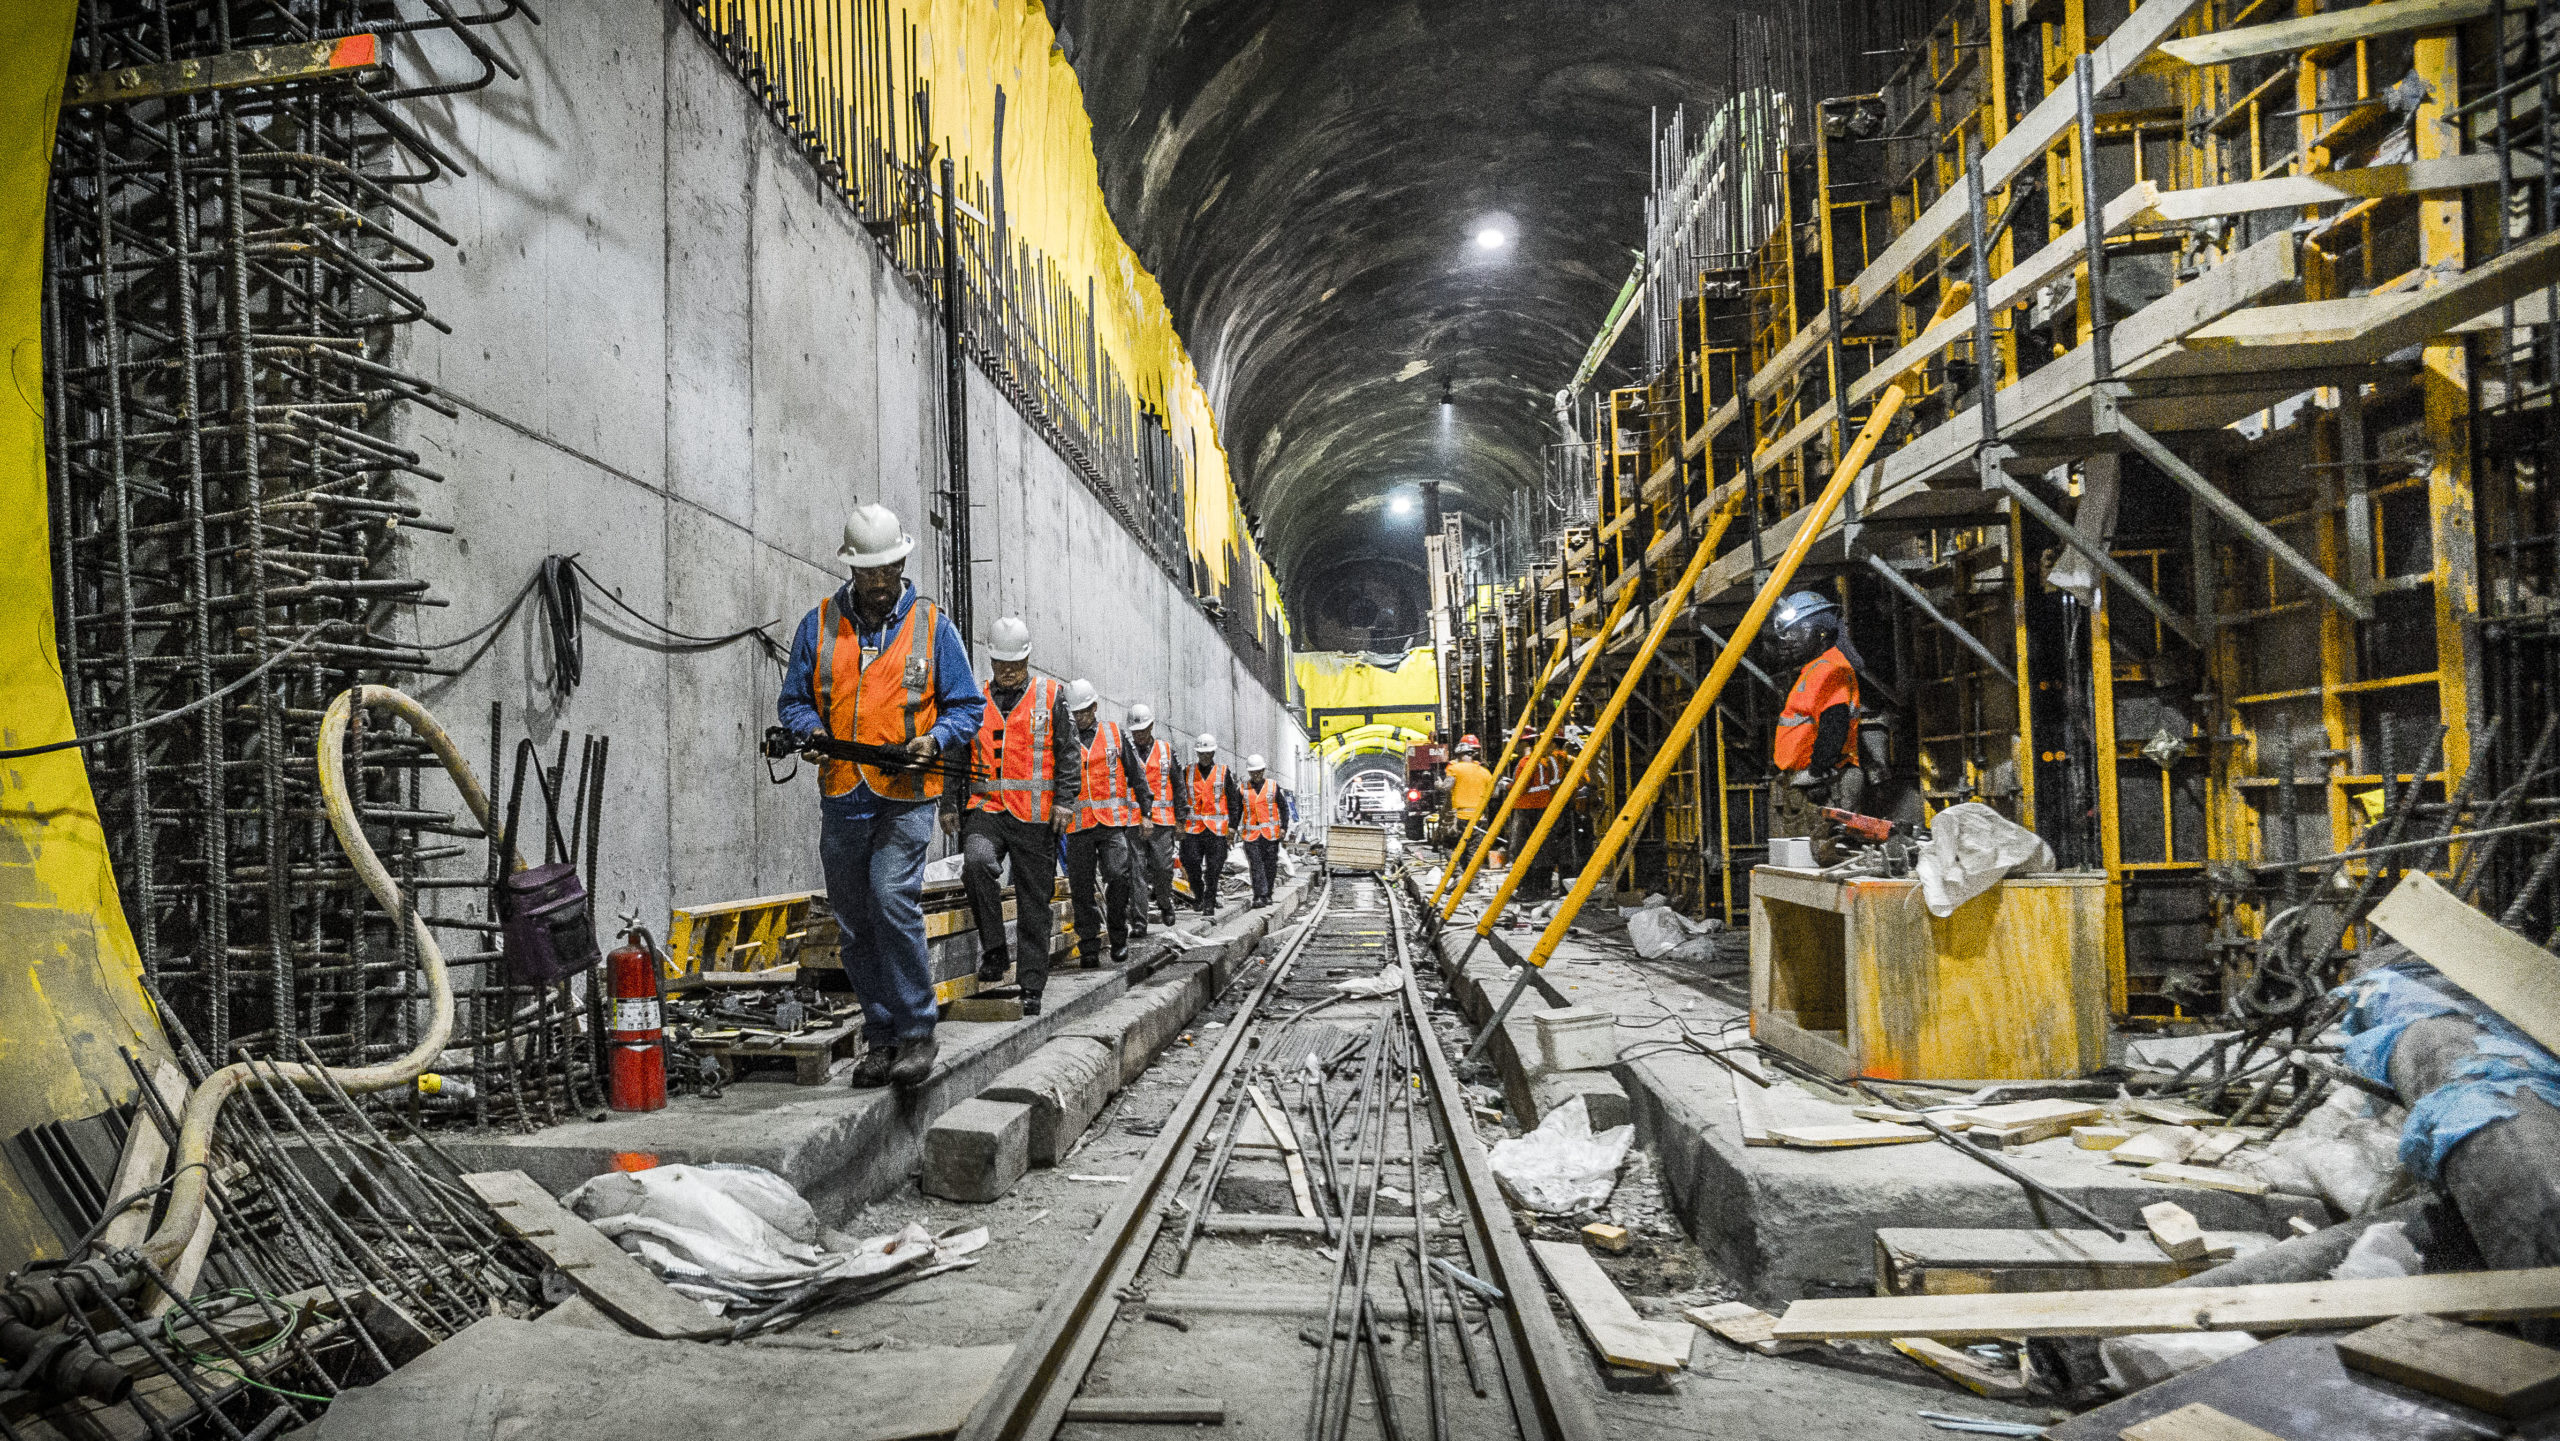 A New Glimpse Into The Gigantic Construction Project Hidden Below NYC